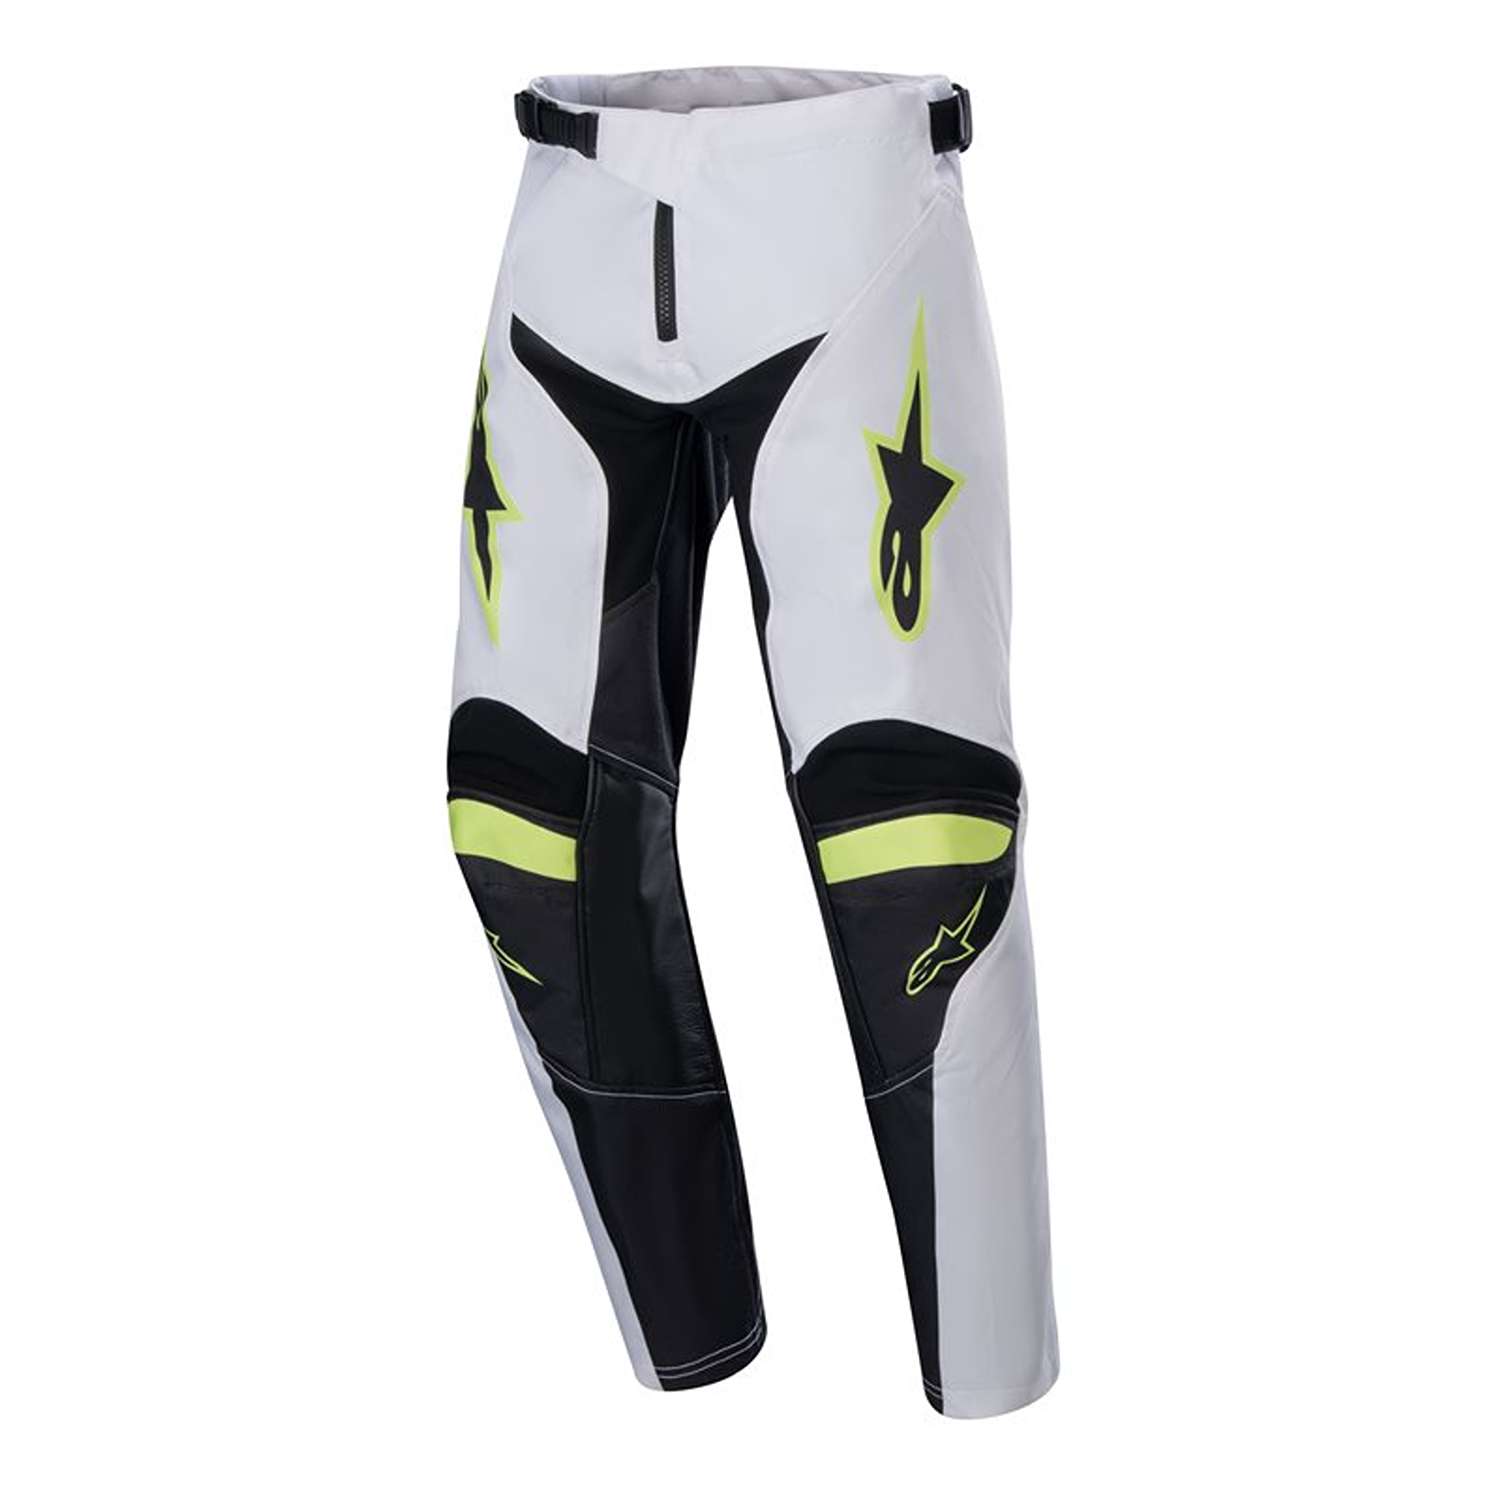 Image of Alpinestars Youth Racer Lucent Pants White Neon Red Yellow Fluo Größe 28